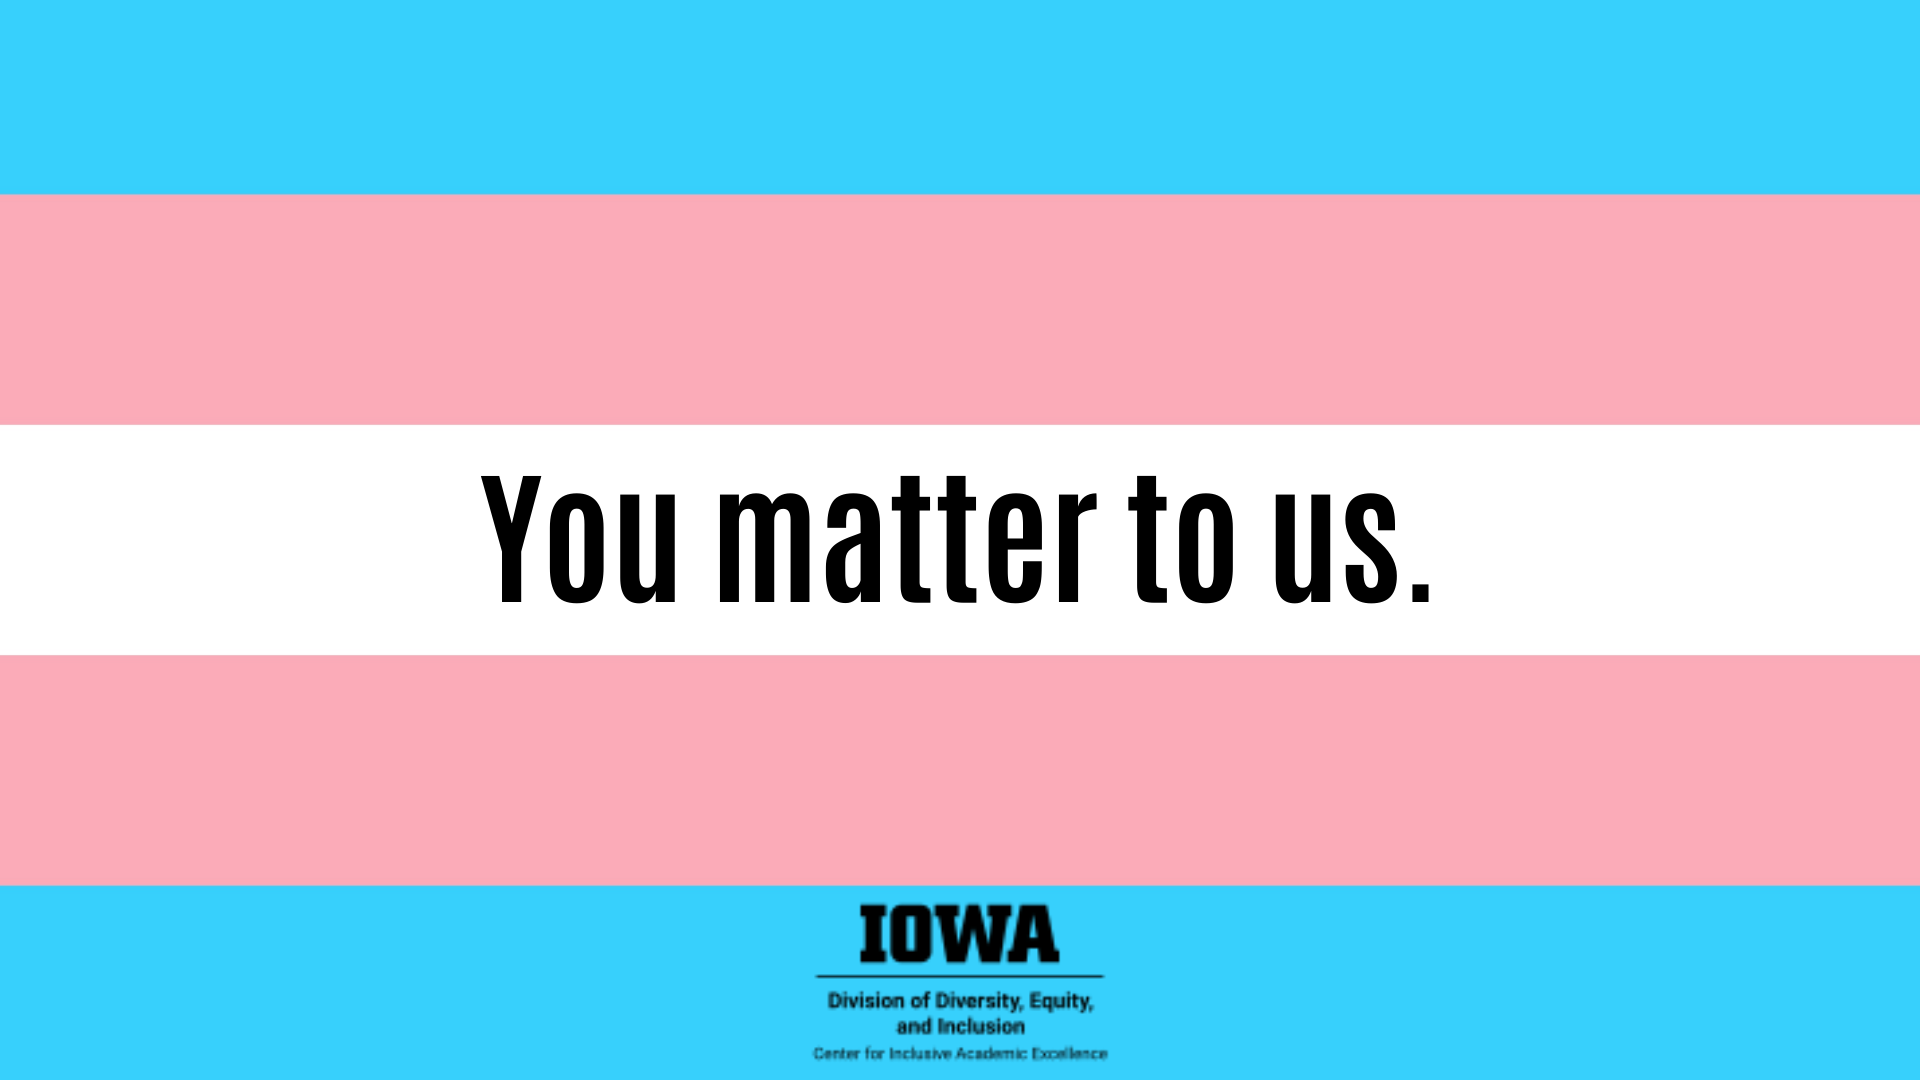 A trans flag graphic with the following text printed on its center: "You matter to us."